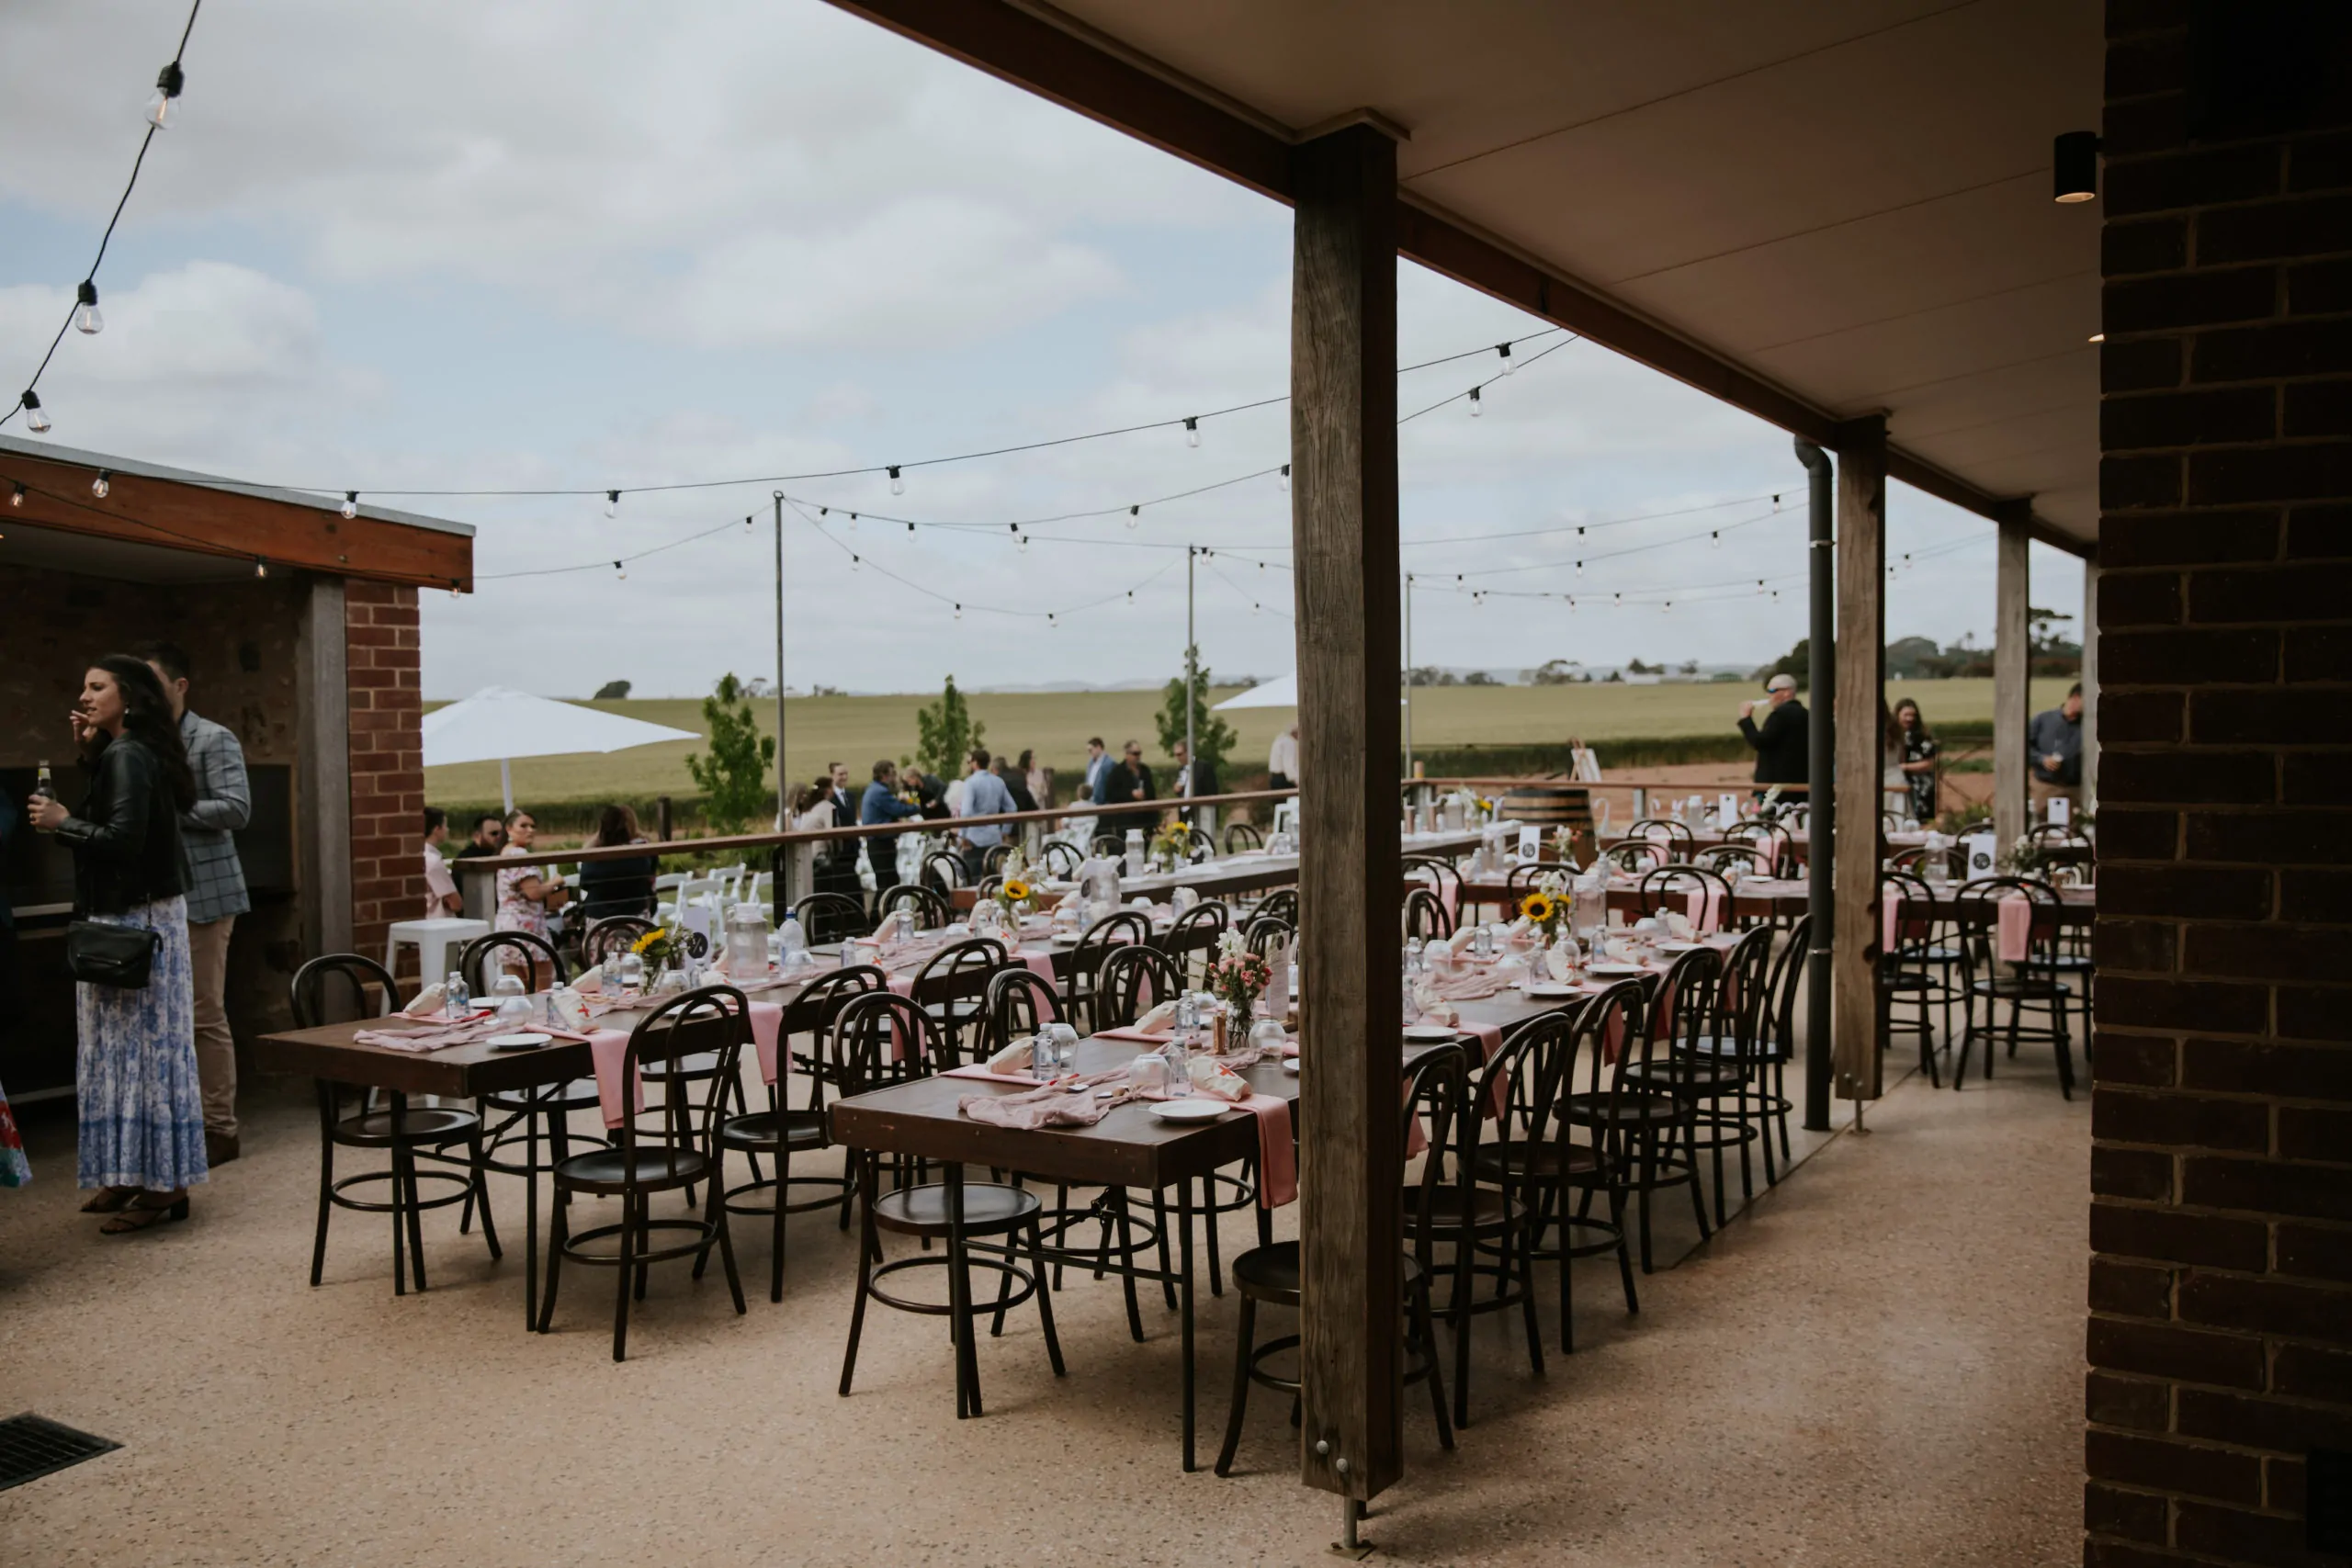 Barns of Freeling, Barossa Valley Barn, Event and Wedding Venue offering a beautiful indoor and outdoor spaces for ceremony and reception. All fully flexible in both catering and drinks.